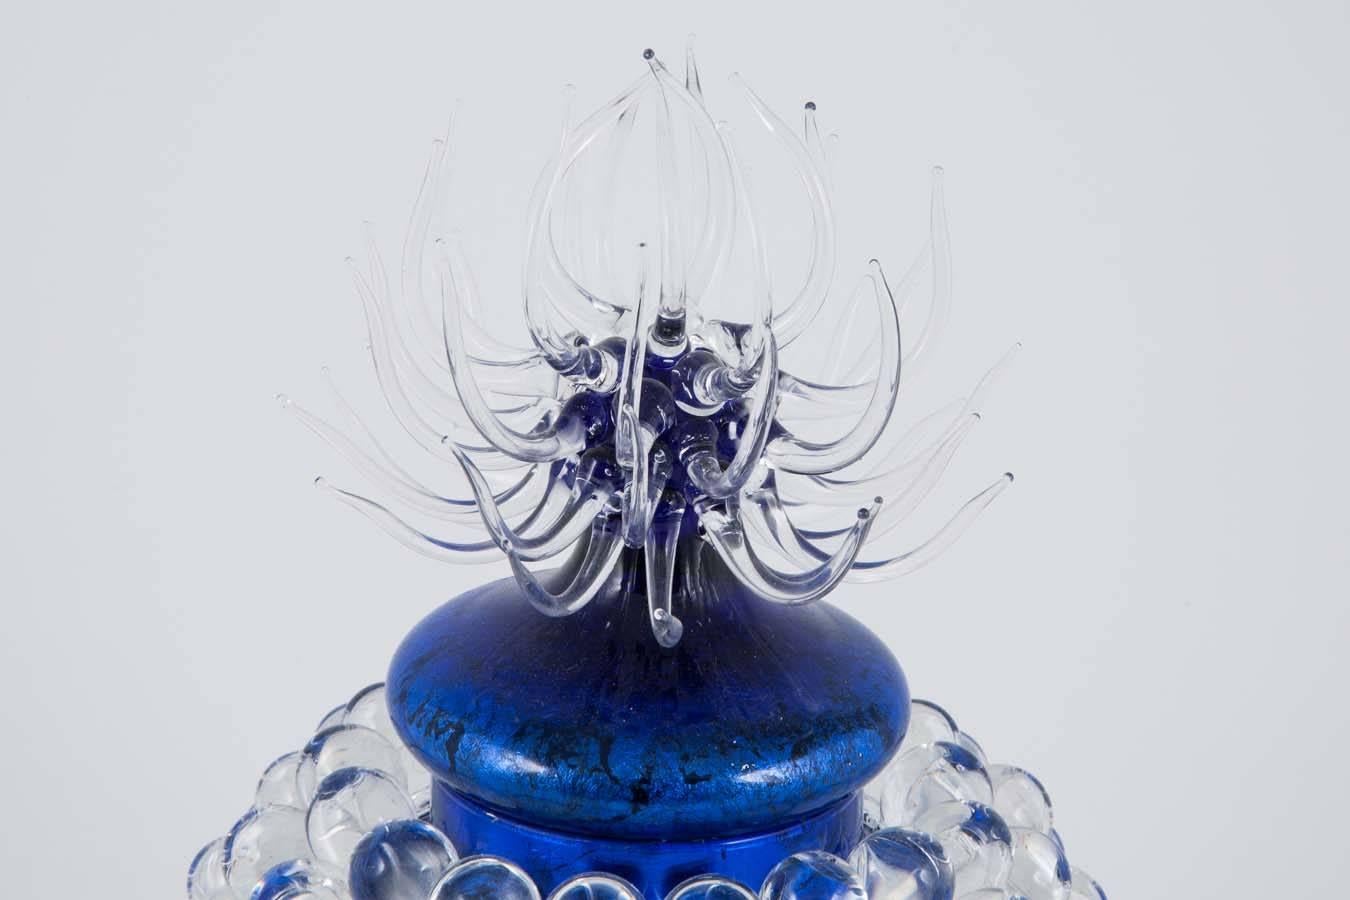 A unique art glass jar by the British glass artist James Lethbridge. Blown glass with gilding on the inside. The outer layer is covered in flameworked decoration and adornment.

Initially following a career choice in production ceramics and gaining